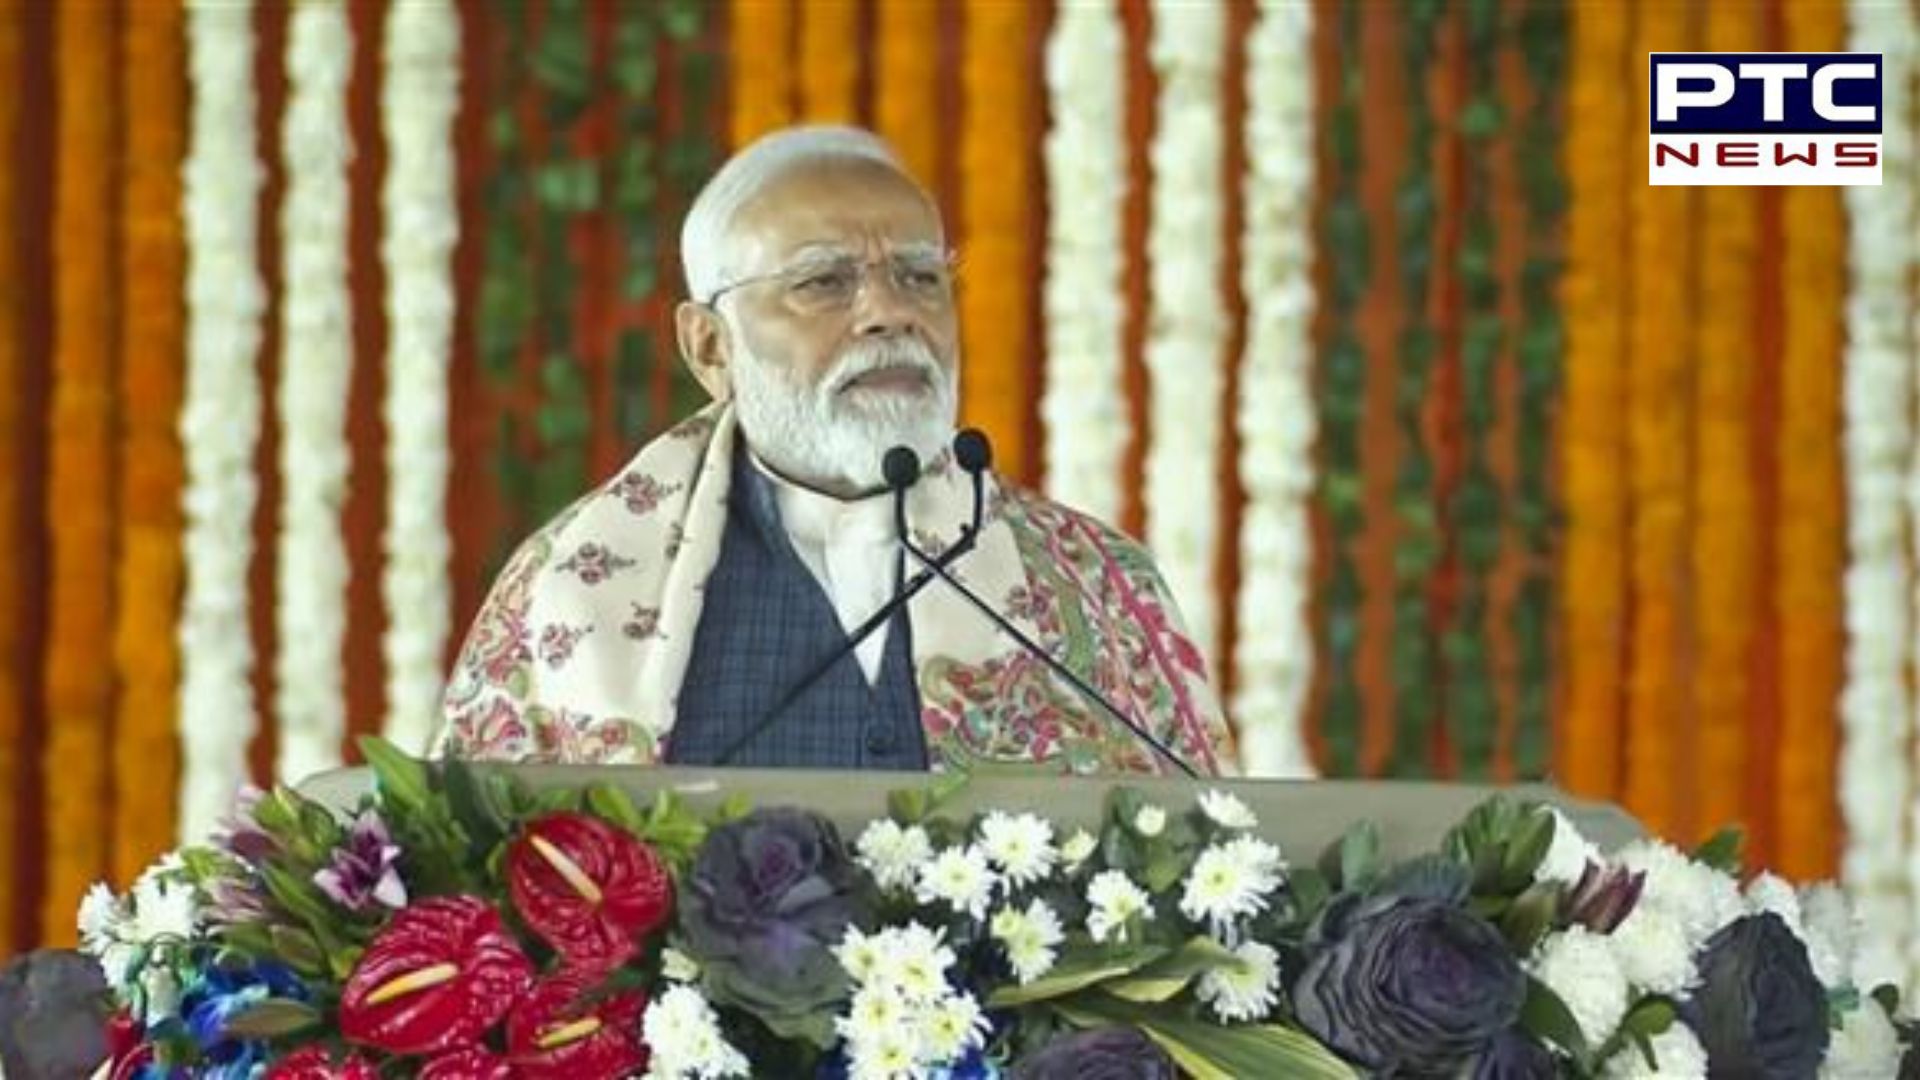 PM Modi launches multifaceted development initiatives in Jammu, says ‘Article 370 was main hurdle’